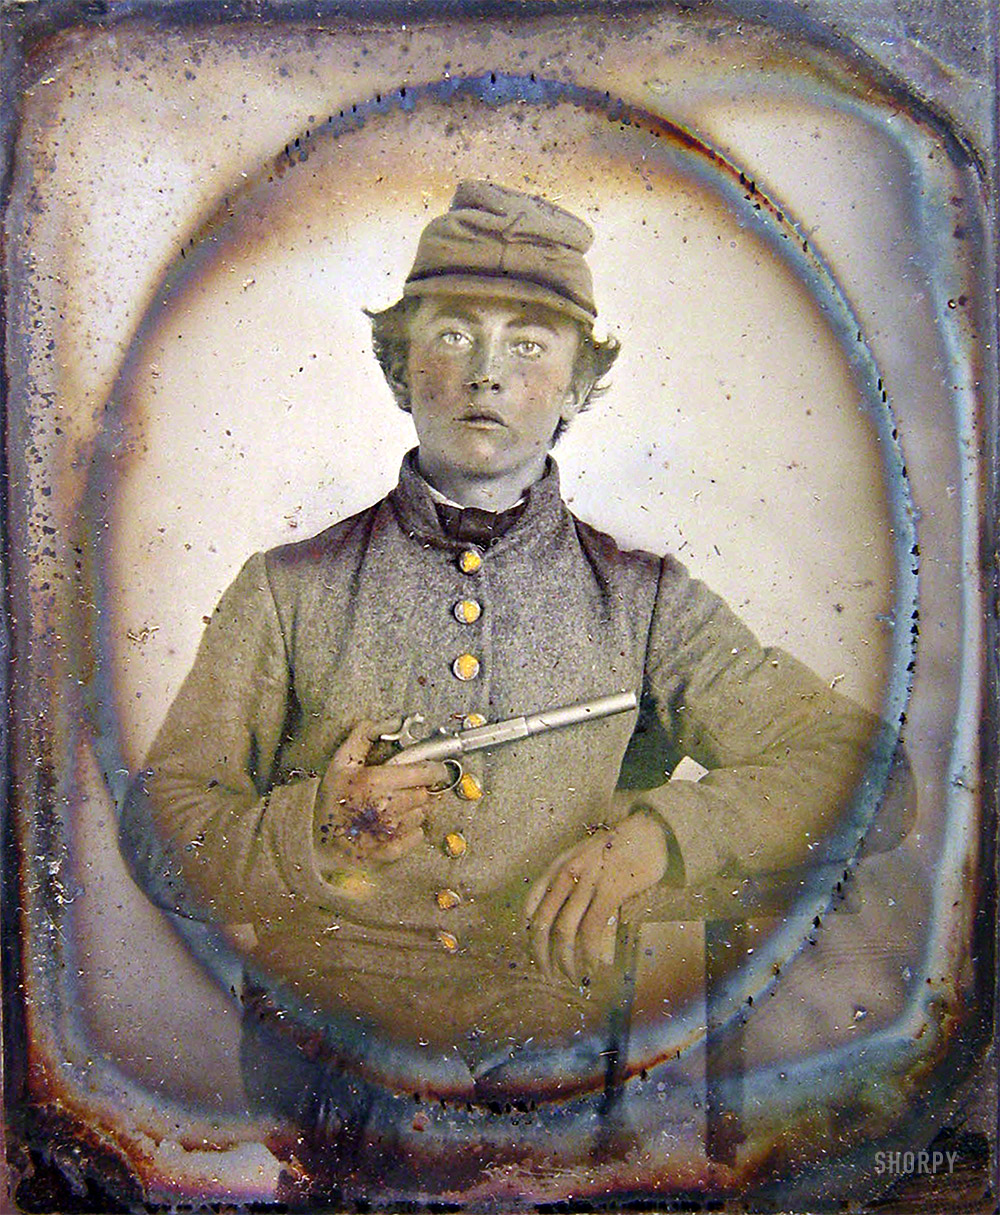 Ca. 1861-65. "Young soldier in Confederate shell jacket and forage cap with single shot pistol." Sixth-plate ambrotype, hand-colored. Liljenquist Family Collection of Civil War Photographs, Library of Congress. View full size.